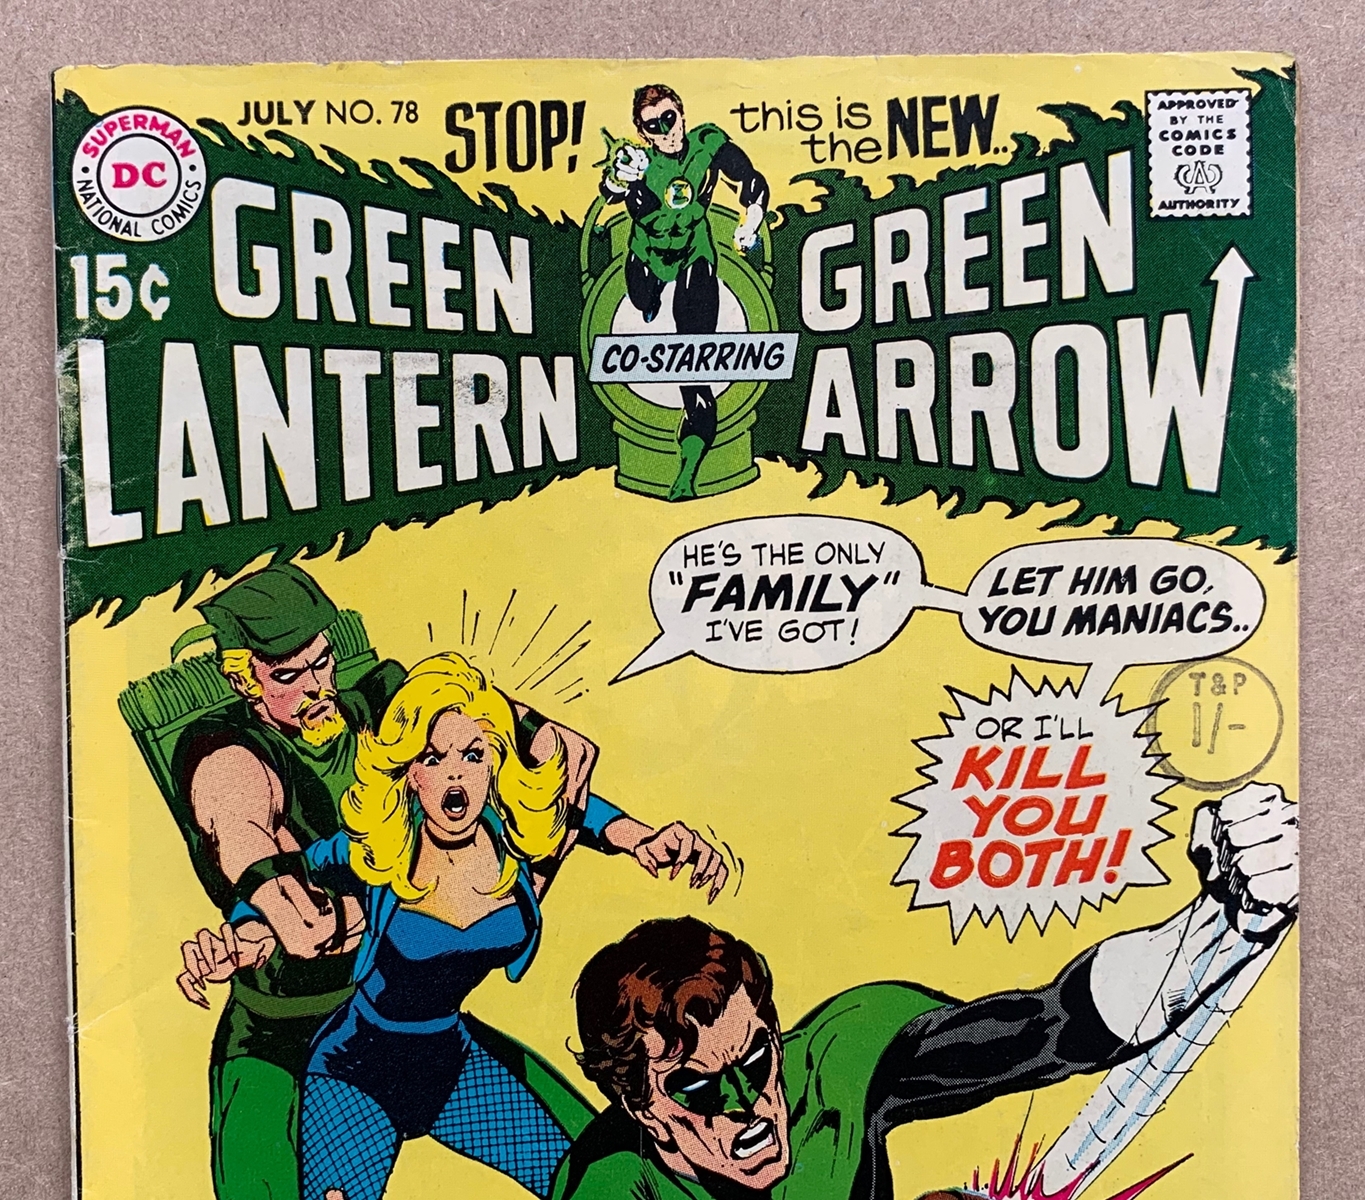 GREEN LANTERN #78 (1970 - DC) VFN (Cents Copy/Pence Stamp) - Black Canary appearances begin. Neal - Image 2 of 11